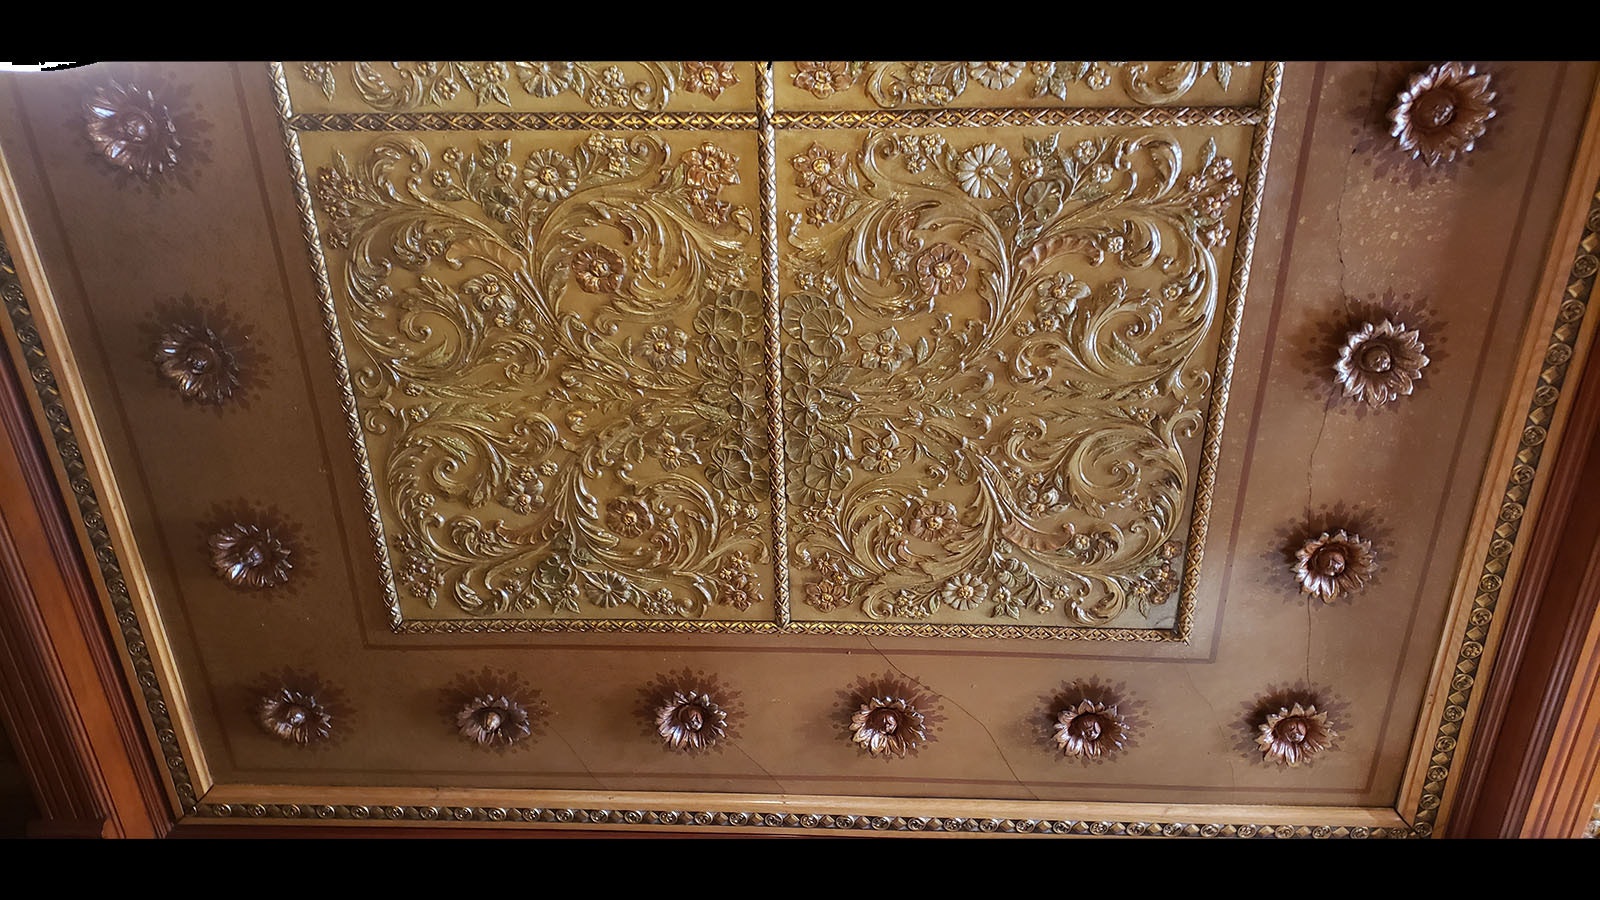 The ceiling panels were a gift from Buffalo Bill Cody. They are carved buffalo hide crafted by Frank Meanea. There isn't another like it in the world.